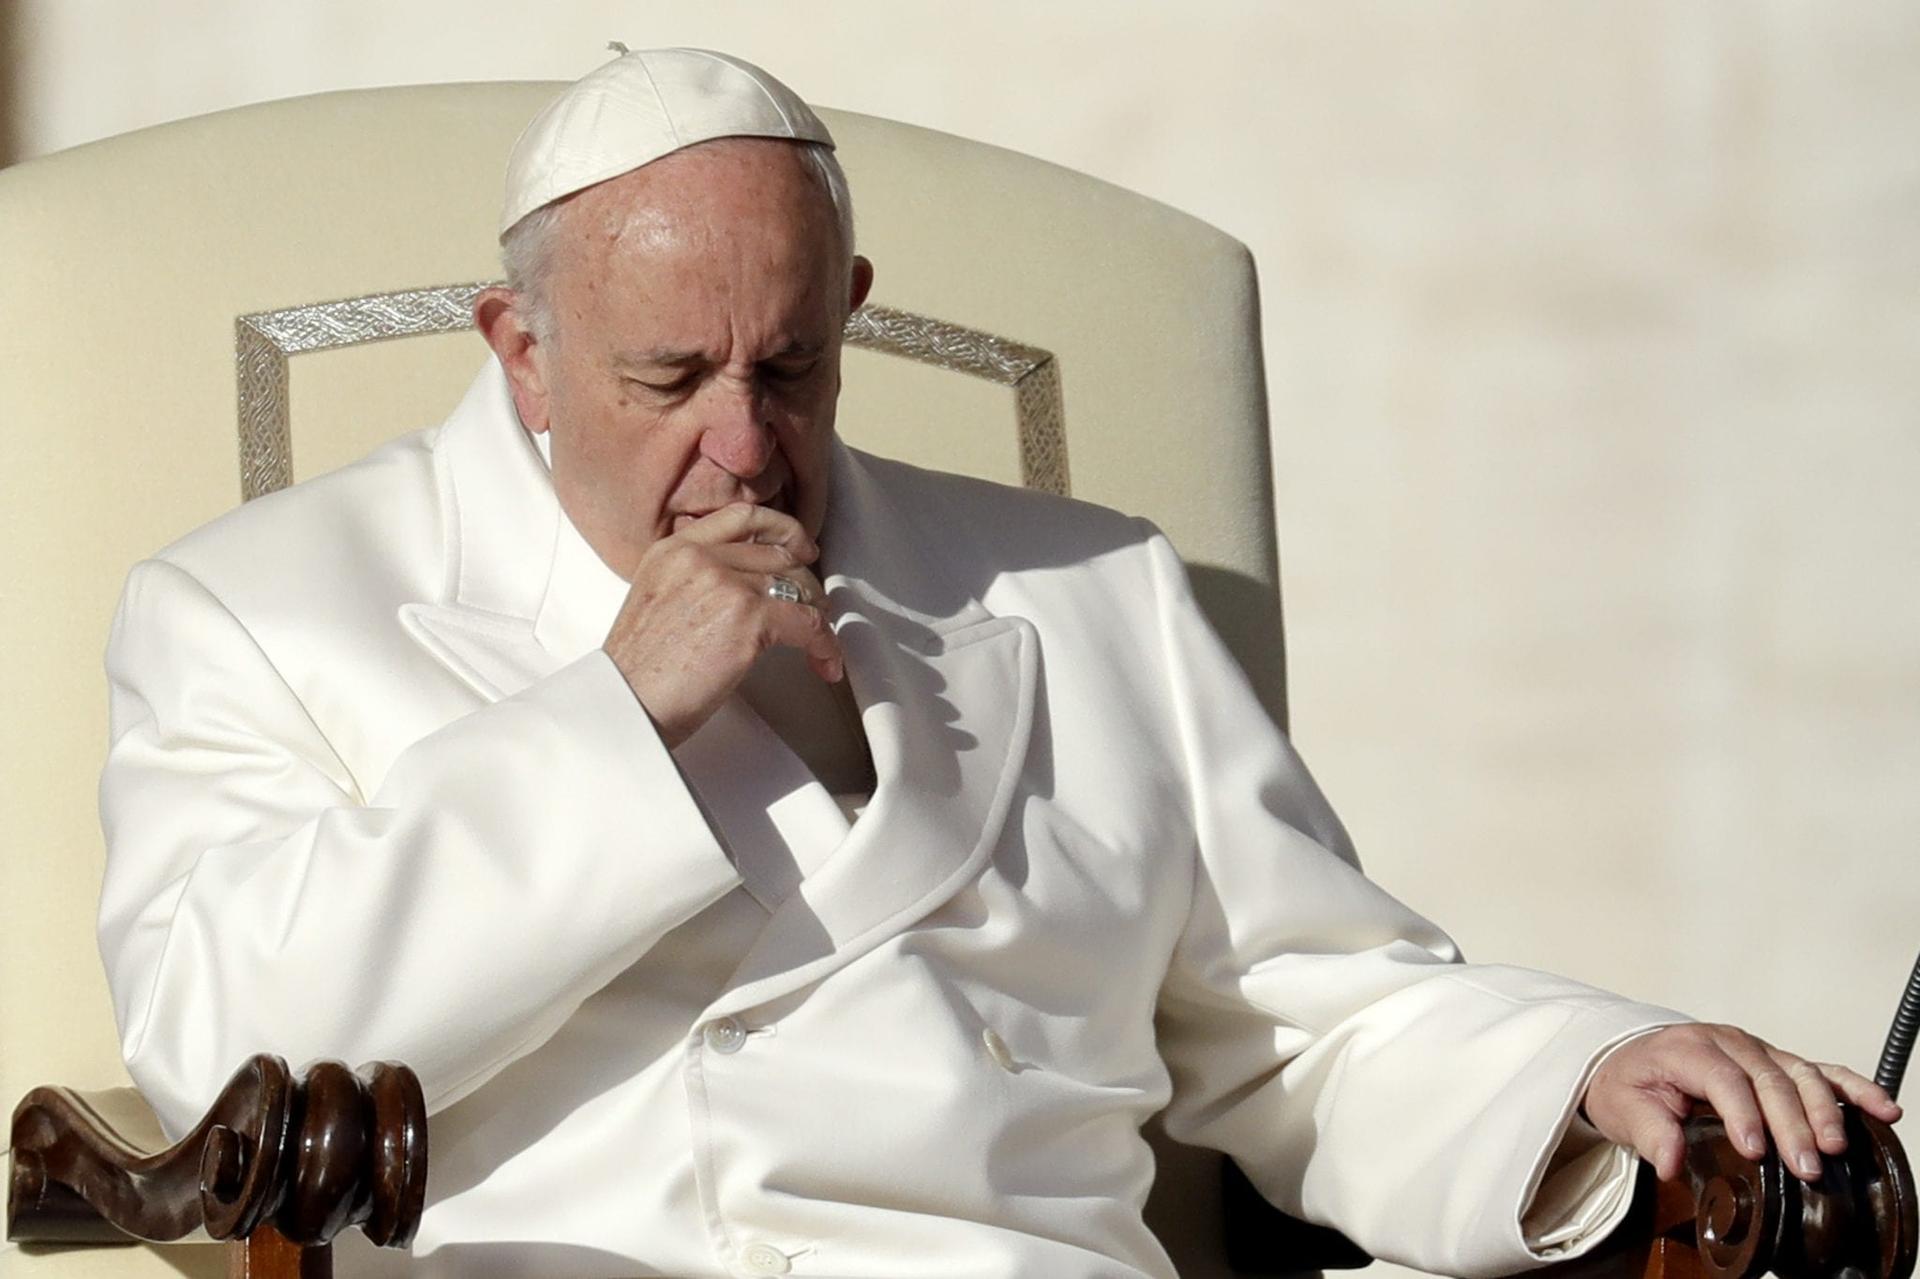 Euthanasia stems from reducing life to “efficiency and productivity,” pope says